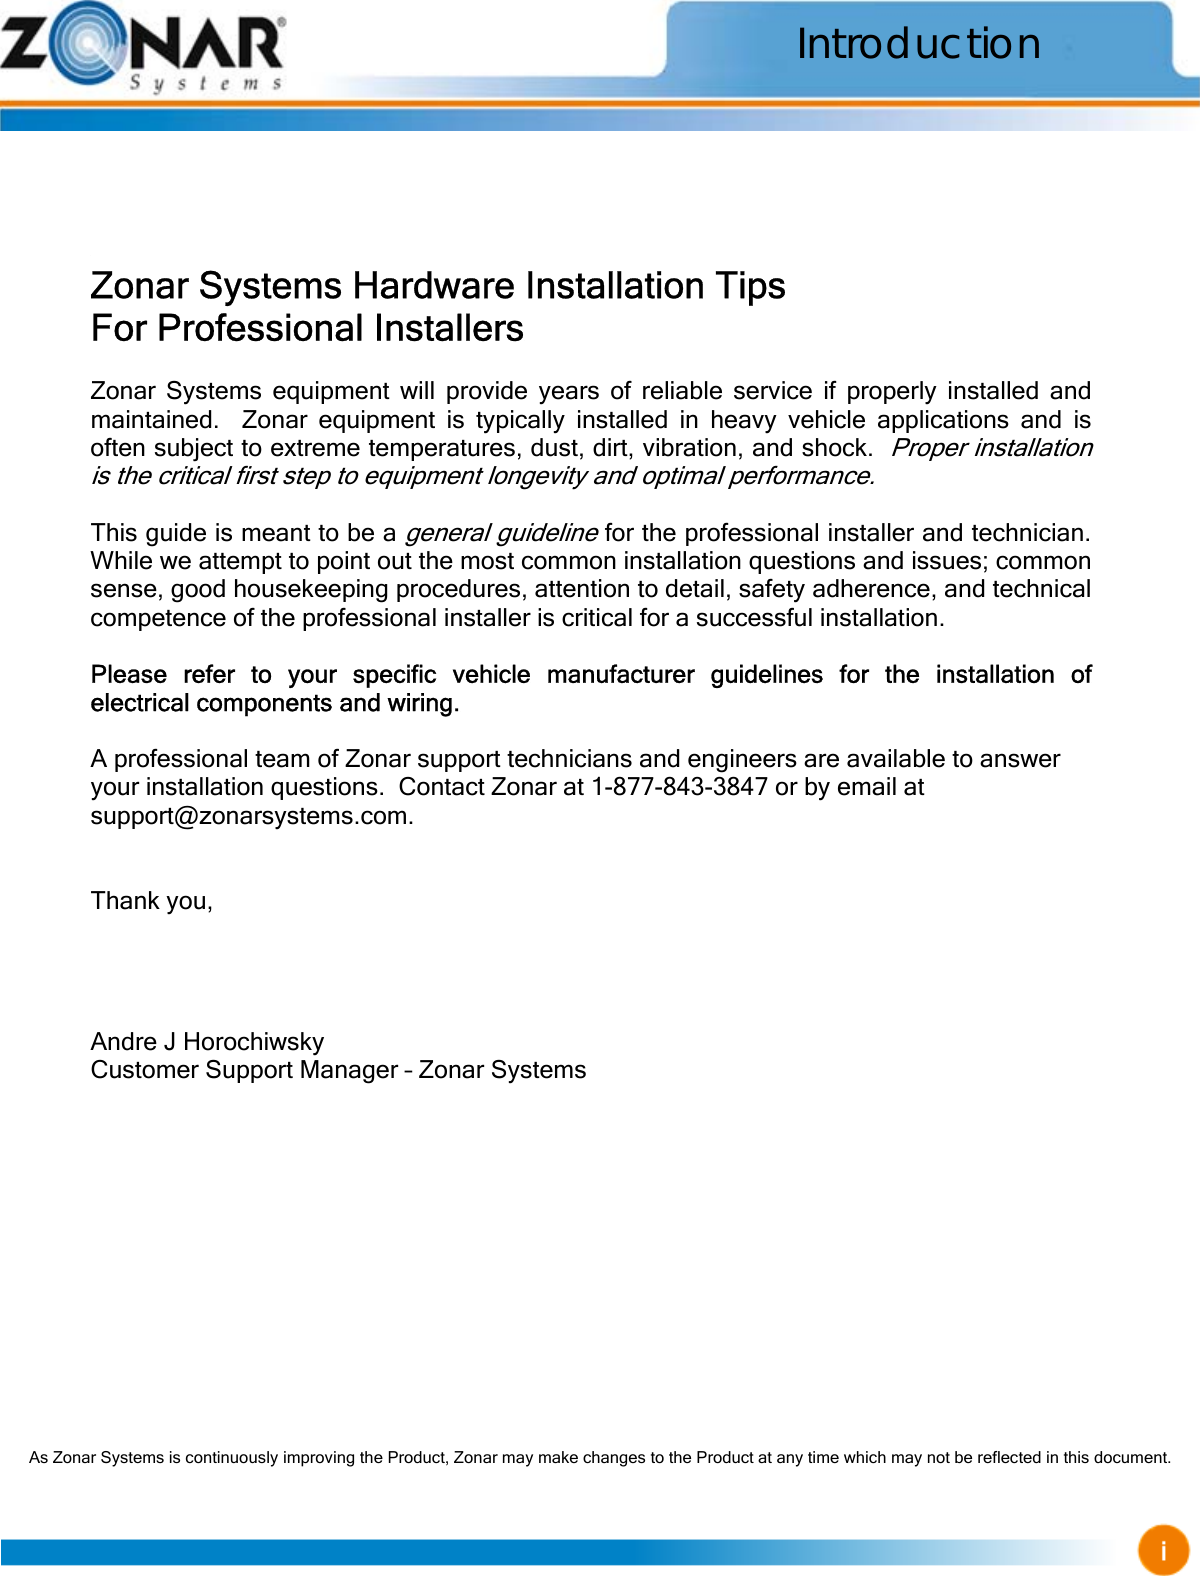                                                     As Zonar Systems is continuously improving the Product, Zonar may make changes to the Product at any time which may not be reflected in this document.      Zonar Systems Hardware Installation Tips For Professional Installers  Zonar Systems equipment will provide years of reliable service if properly installed and maintained.  Zonar equipment is typically installed in heavy vehicle applications and is often subject to extreme temperatures, dust, dirt, vibration, and shock.  Proper installation is the critical first step to equipment longevity and optimal performance.  This guide is meant to be a general guideline for the professional installer and technician.  While we attempt to point out the most common installation questions and issues; common sense, good housekeeping procedures, attention to detail, safety adherence, and technical competence of the professional installer is critical for a successful installation.  Please refer to your specific vehicle manufacturer guidelines for the installation of electrical components and wiring.  A professional team of Zonar support technicians and engineers are available to answer your installation questions.  Contact Zonar at 1-877-843-3847 or by email at support@zonarsystems.com.   Thank you,     Andre J Horochiwsky Customer Support Manager – Zonar Systems Introduction 